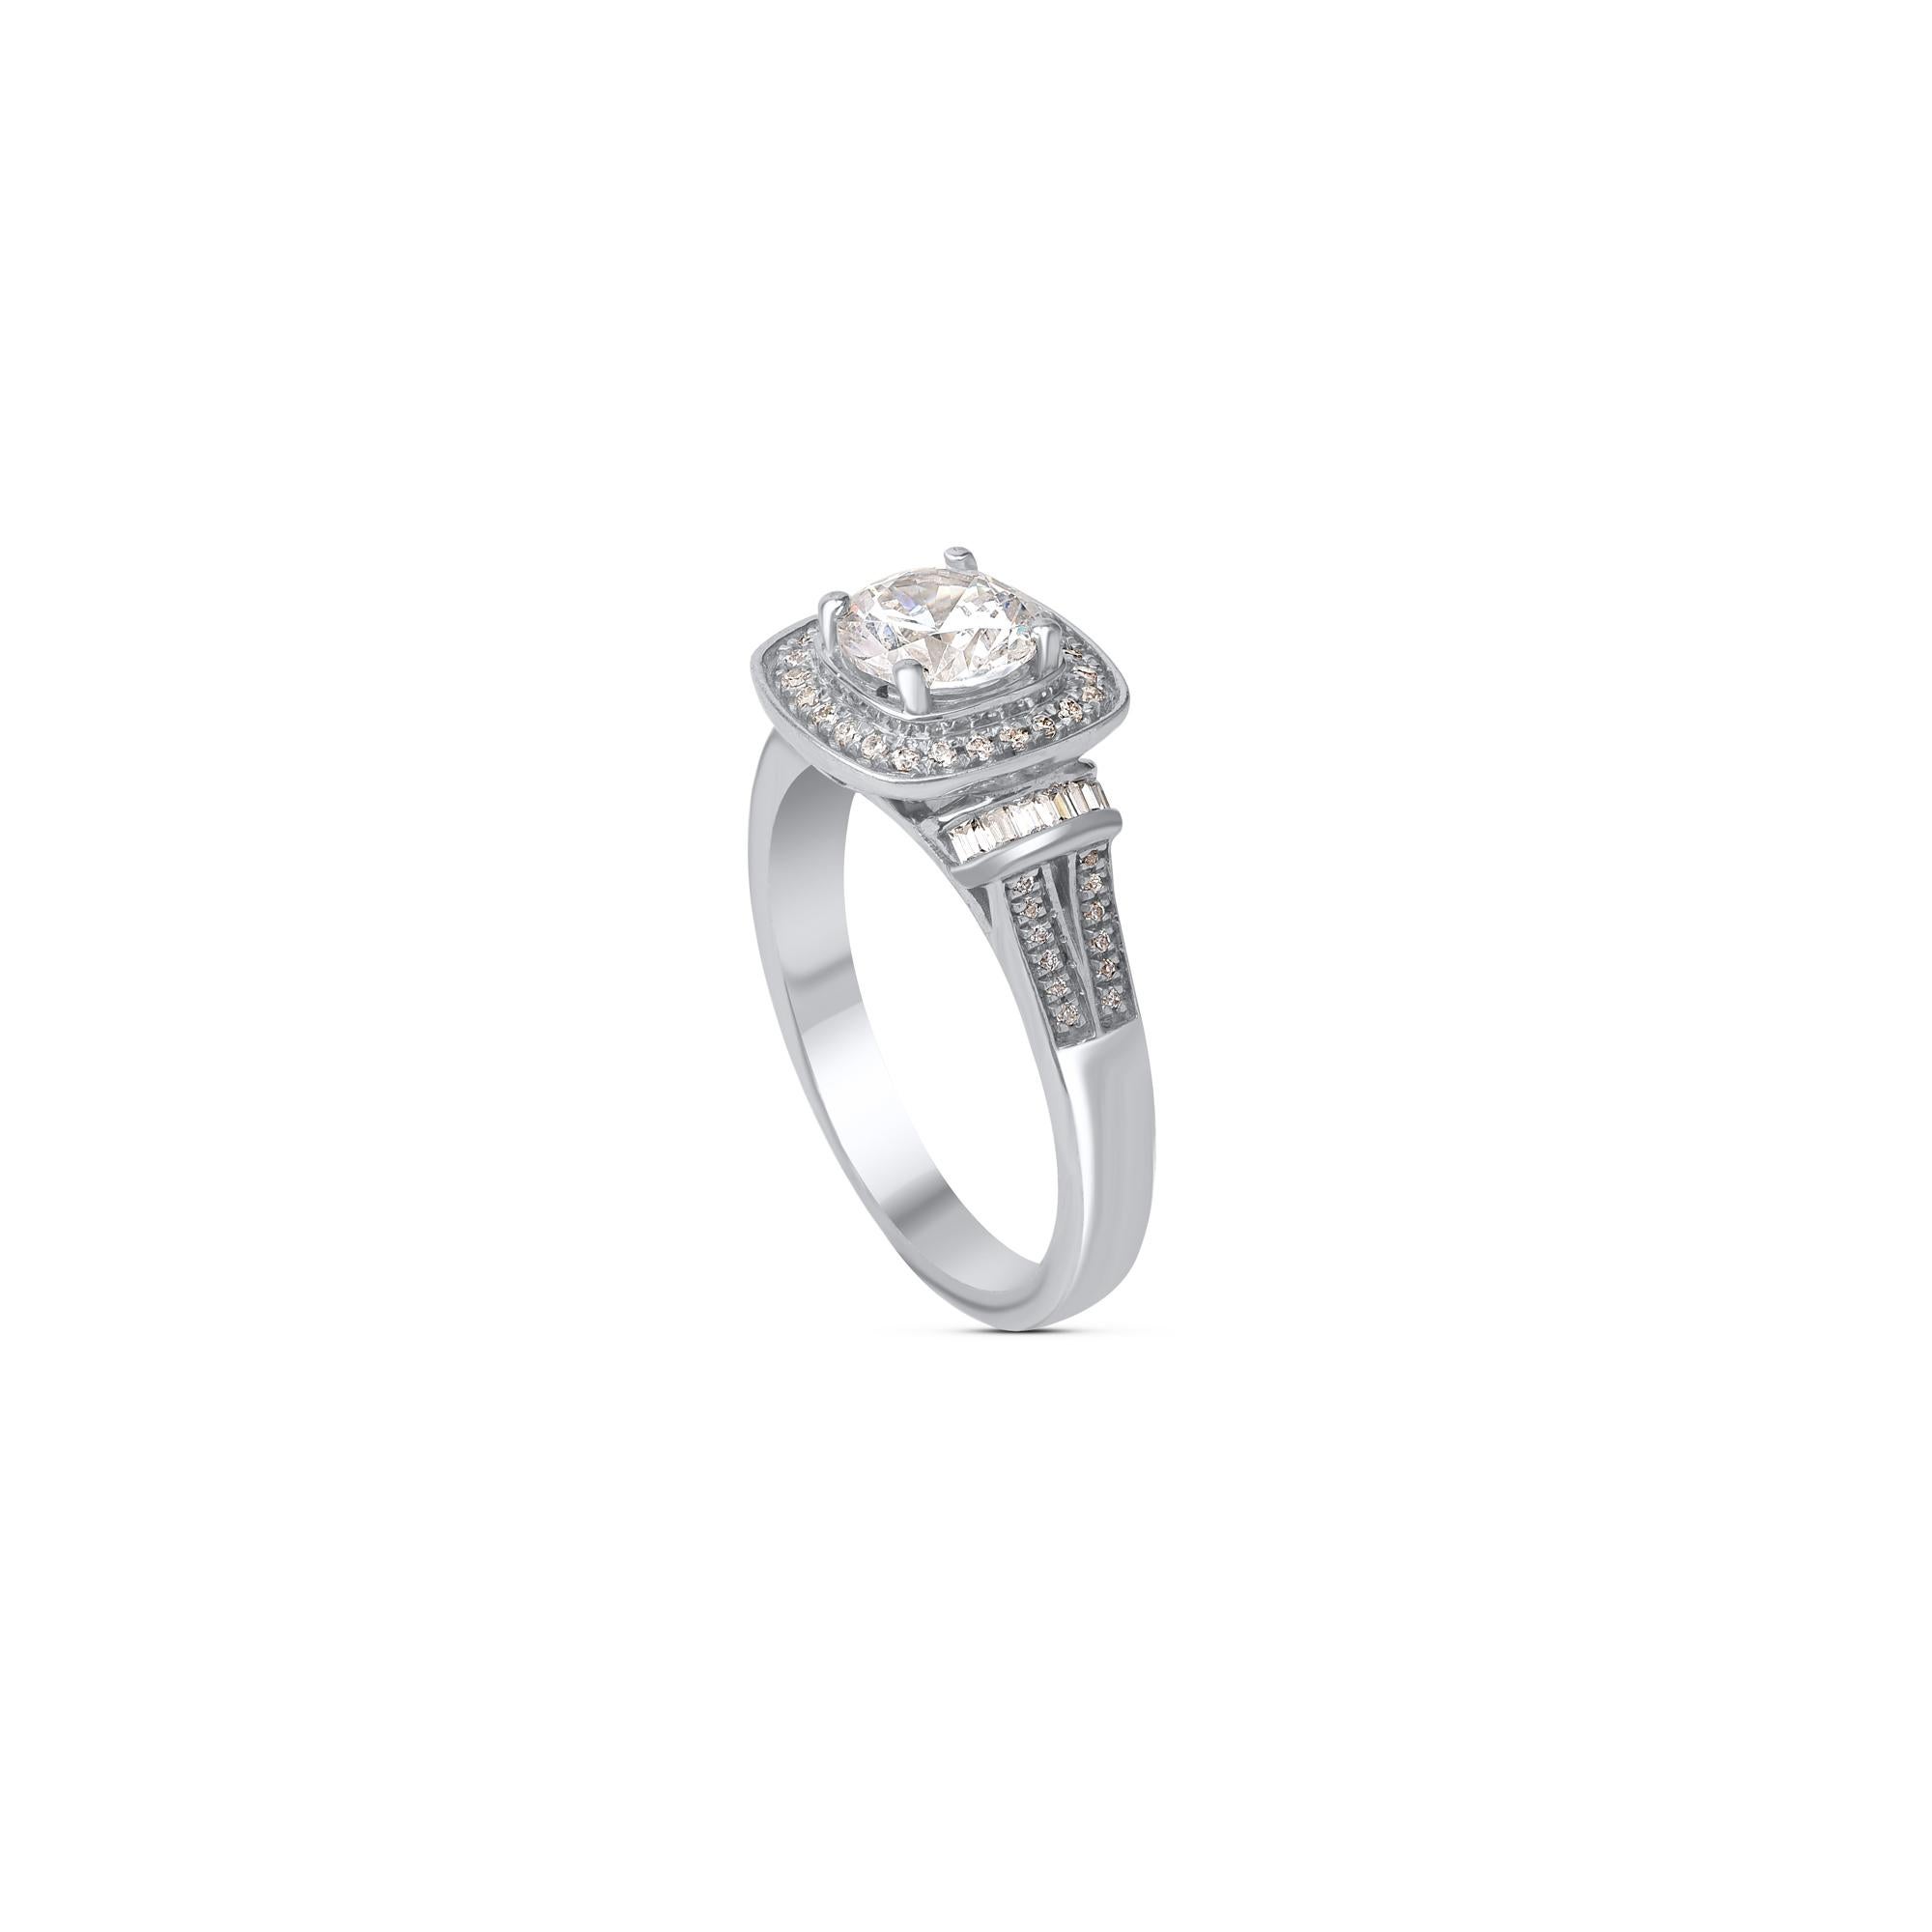 Breathtaking diamond studded engagement ring that is ready to make you shine. Designed to perfection in 18 kt white gold and glitters beautifully with 49 brilliant-cut and 14 baguette-cut diamonds embellished in prong, pave and channel setting.